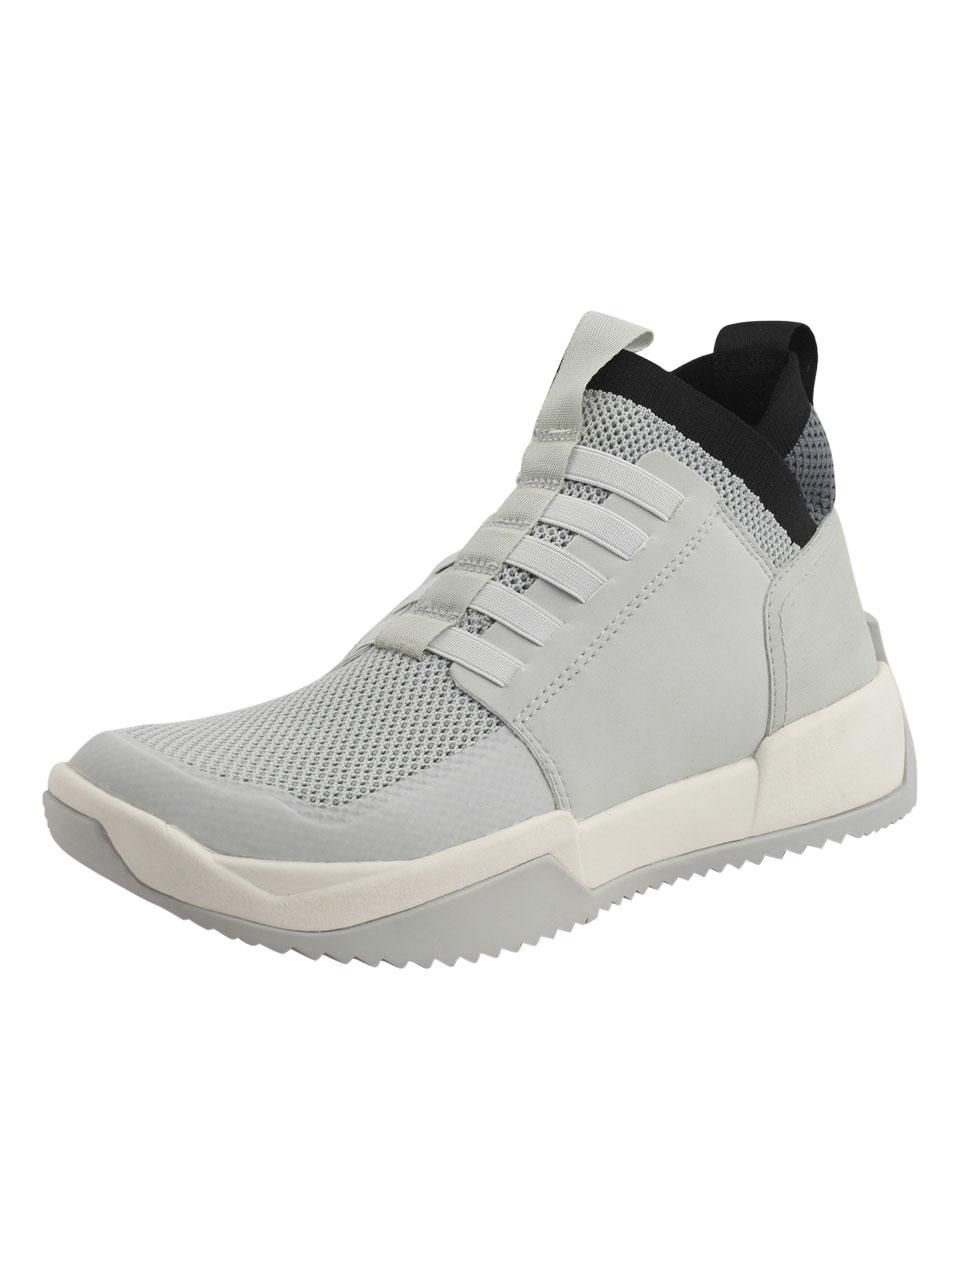 g-star raw shoes men's